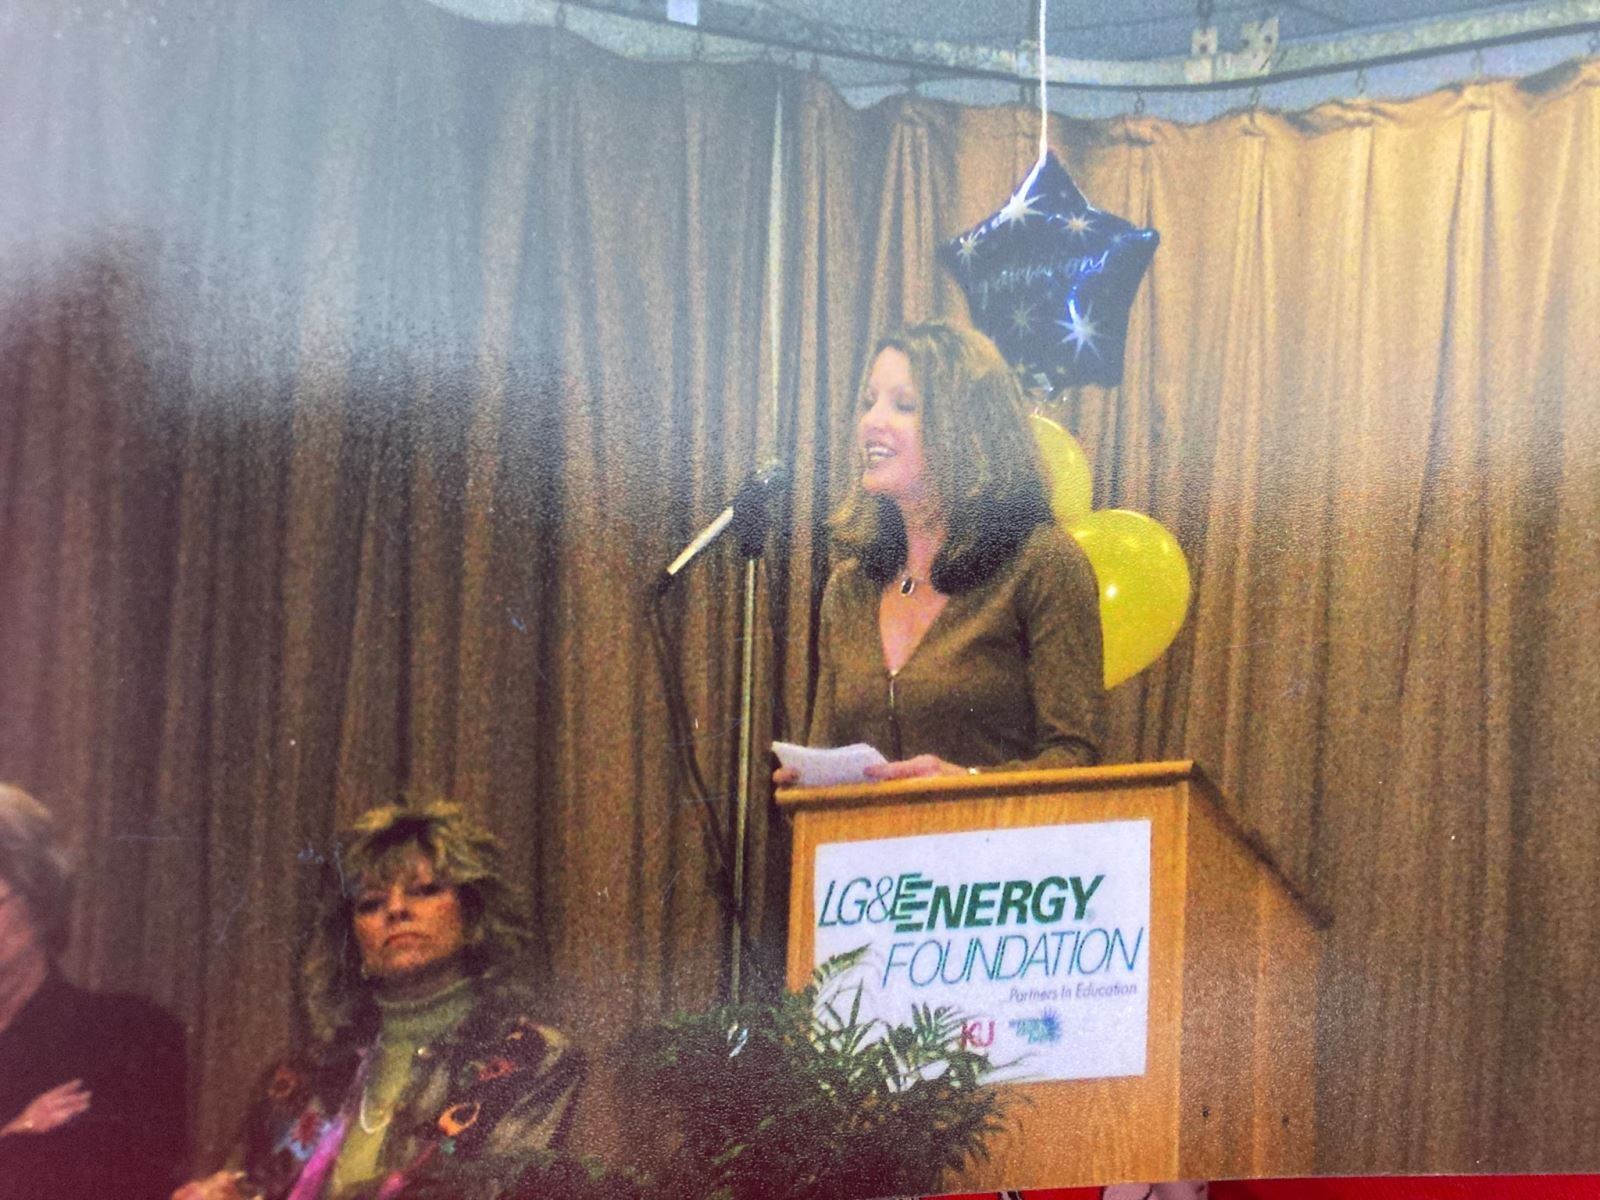 a woman stands at a podium that says igenergy foundation